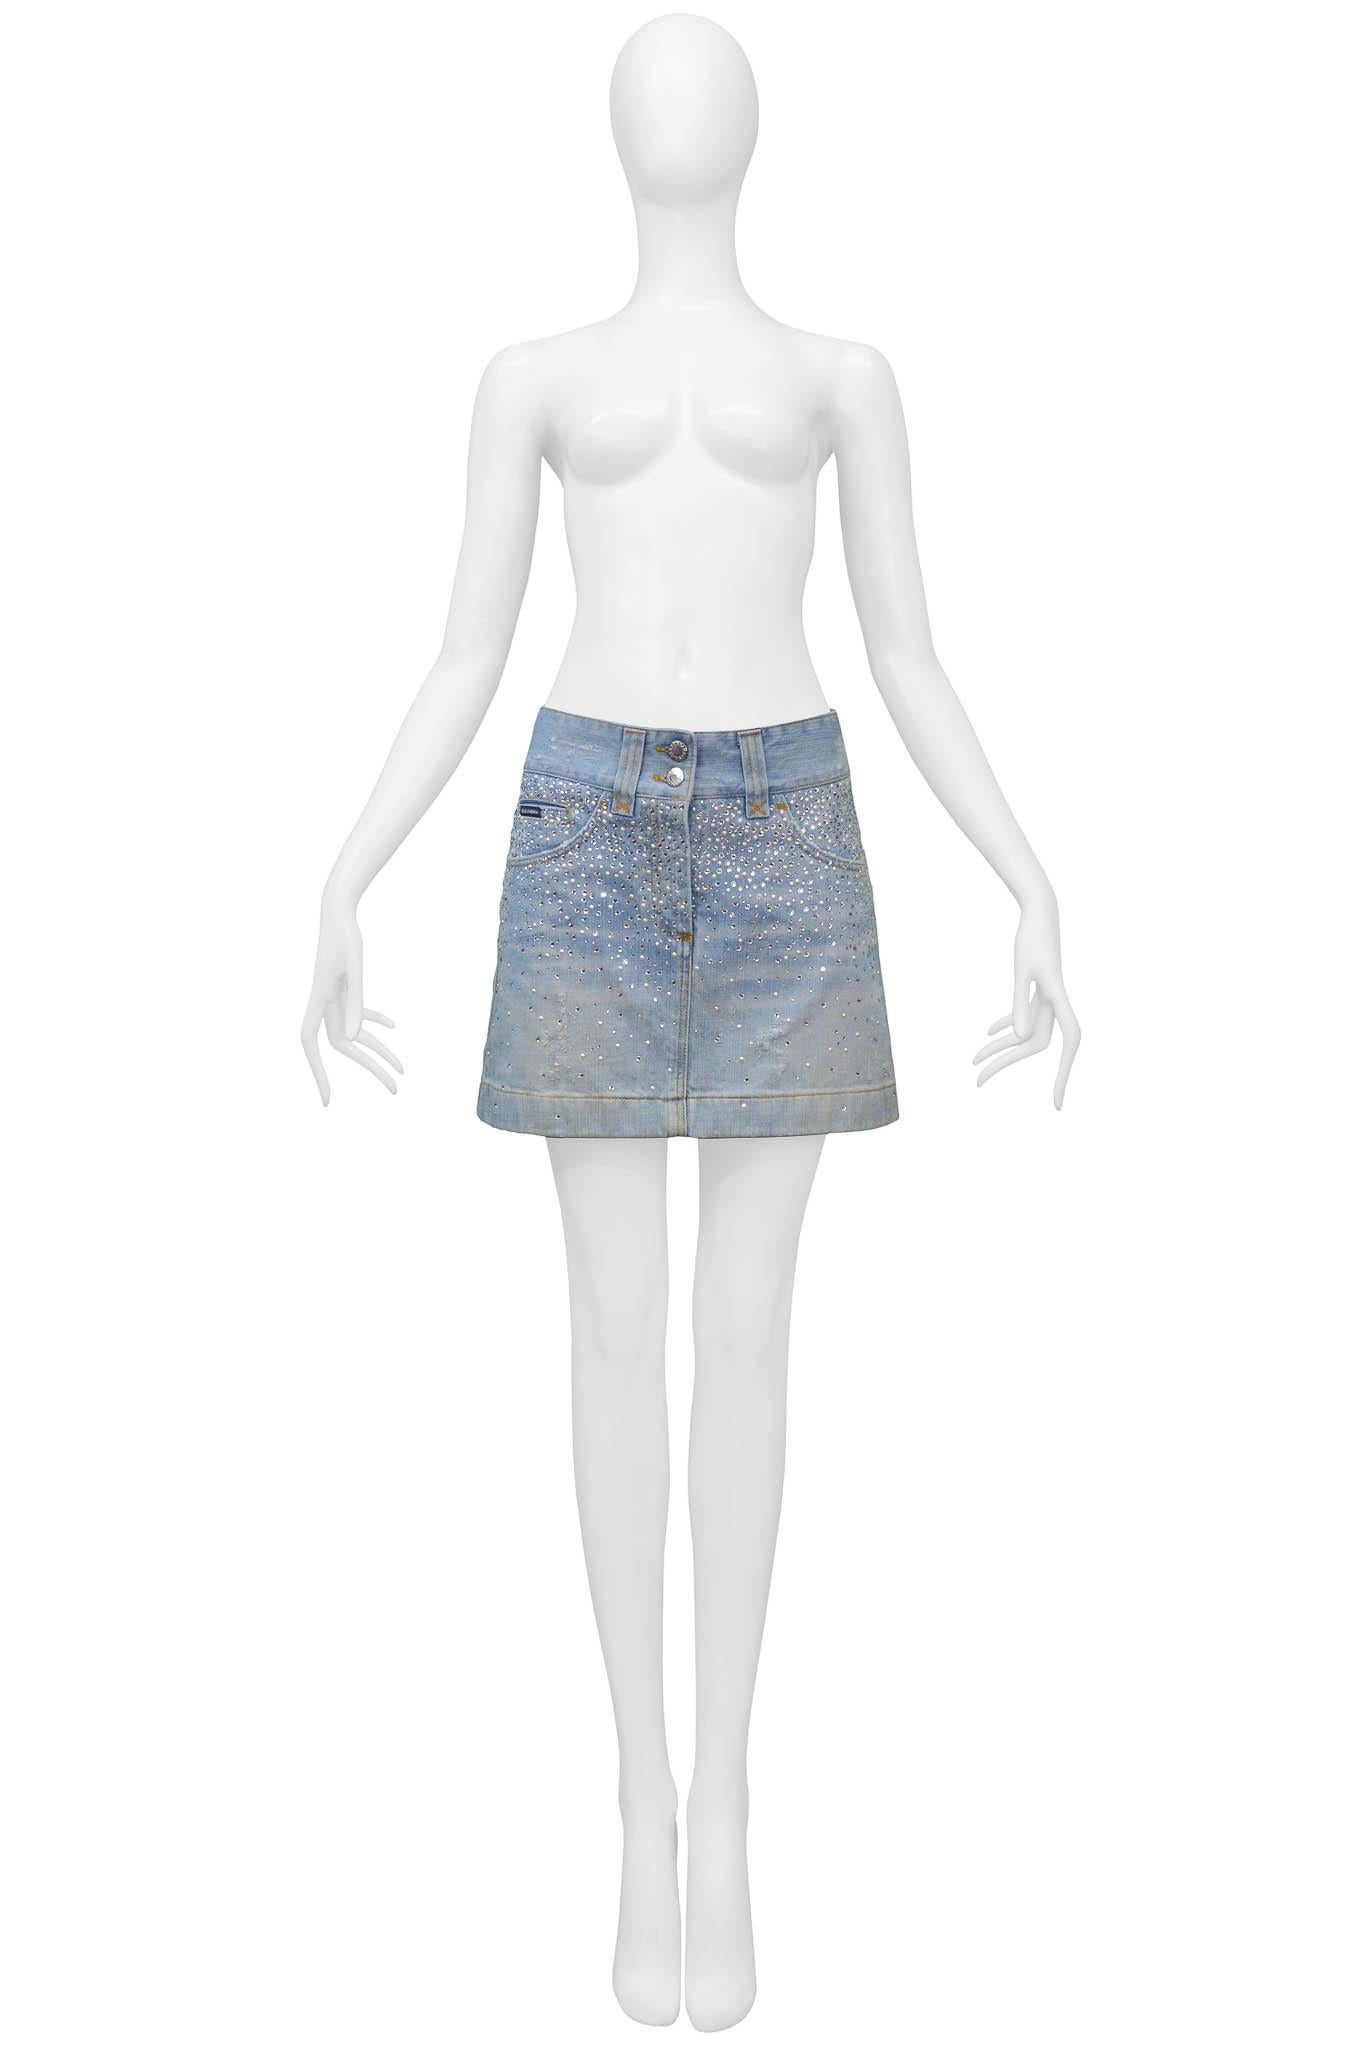 Resurrection Vintage is excited to offer a vintage Dolce & Gabbana denim mini skirt featuring yellow stitching, back patch pockets, and a rhinestone and pearl gradient on the front and back of the skirt.

Dolce & Gabbana
Size 38
Cotton
Excellent